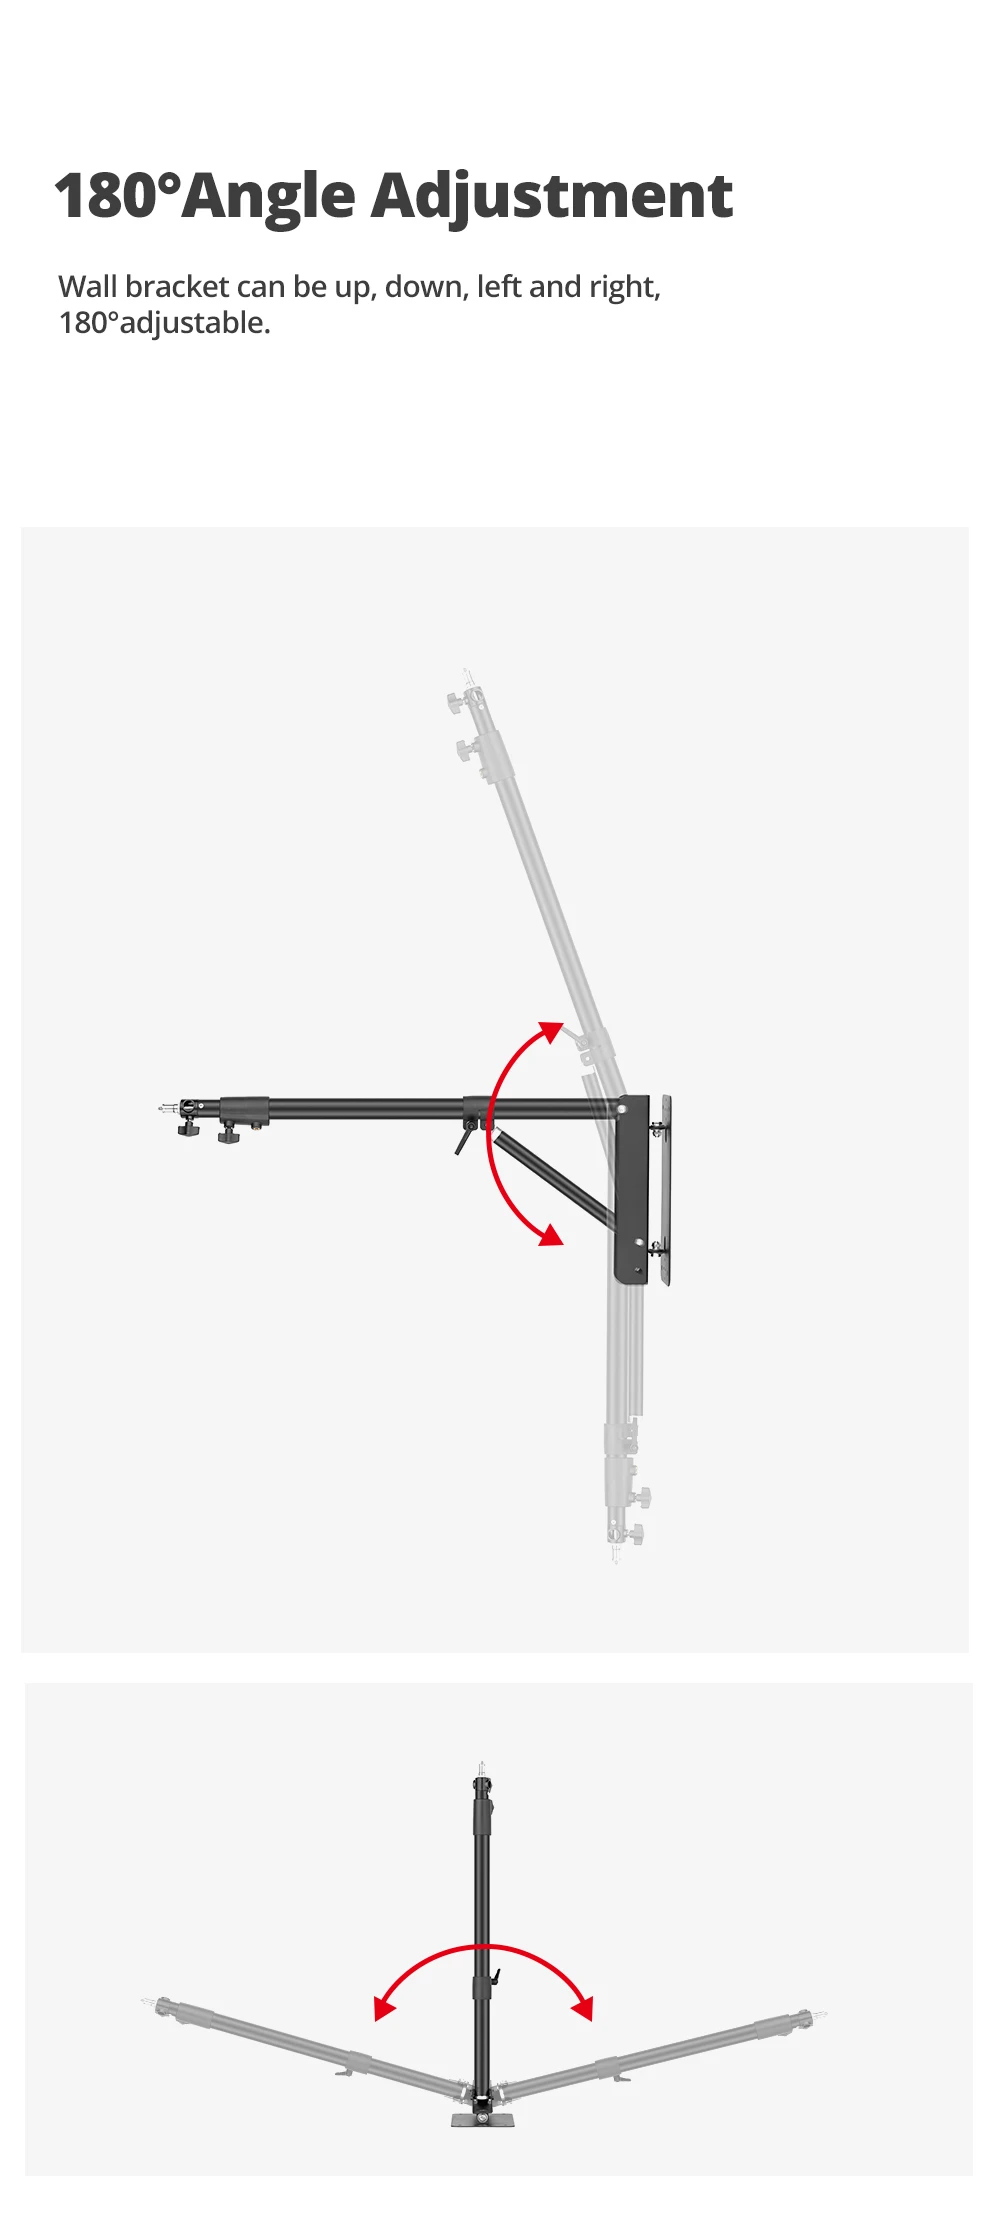 80cm - 136cm Triangle Wall Mounting Boom Arm Light Stand for Photography Studio Video Strobe Flash Lighting